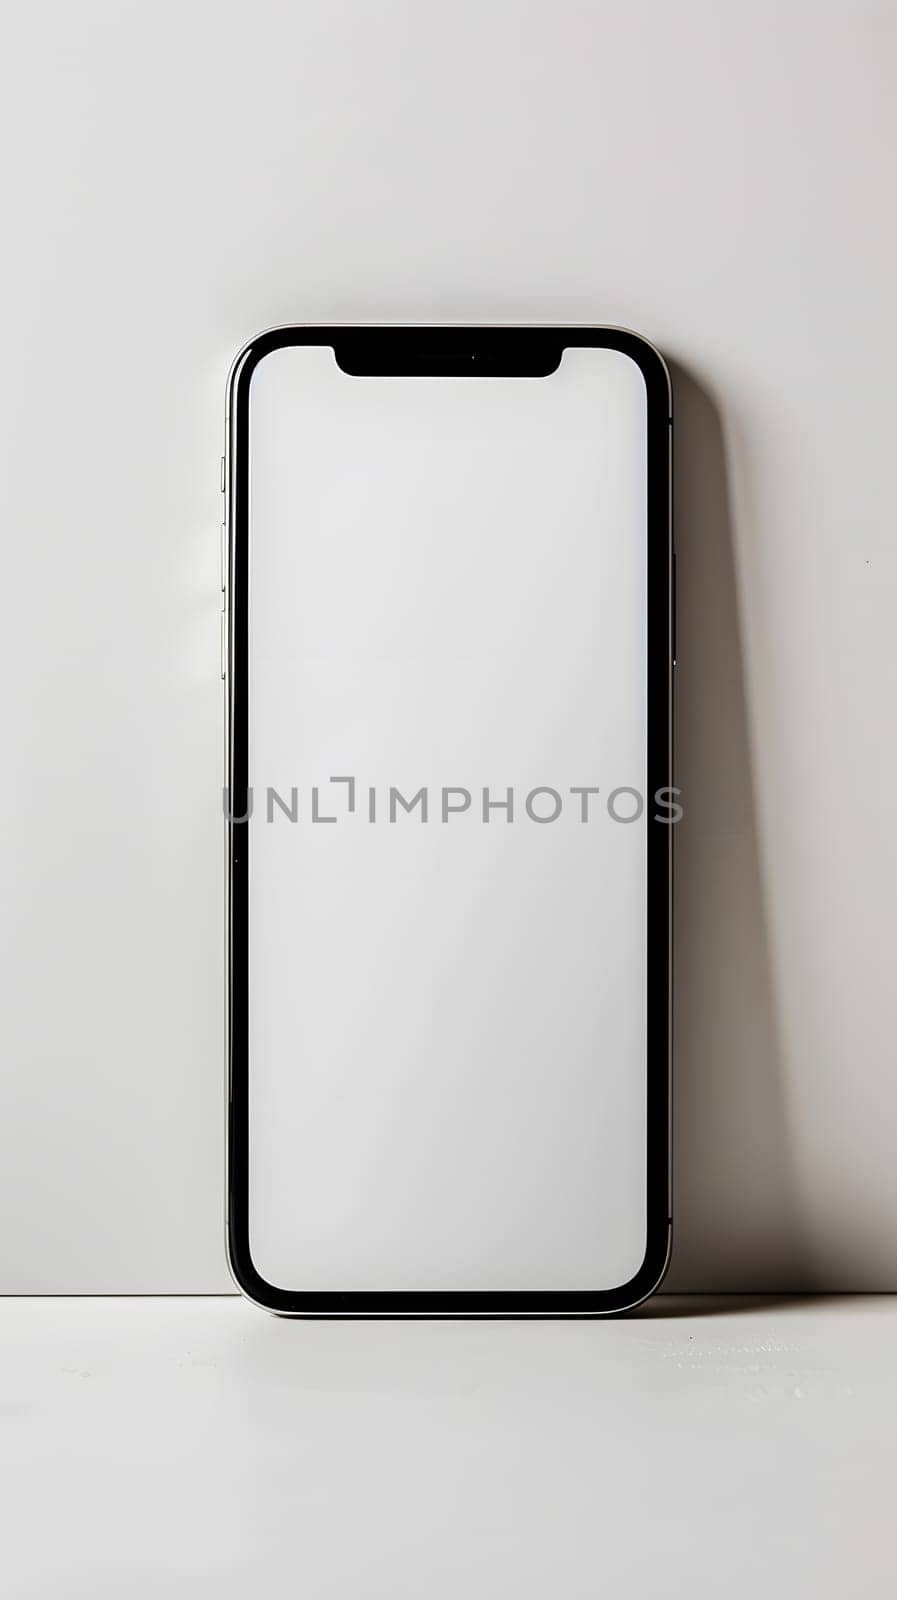 A rectangular black cell phone with a white screen, made of metal and plastic, is placed on a white table. It is an automotive lighting gadget and communication device